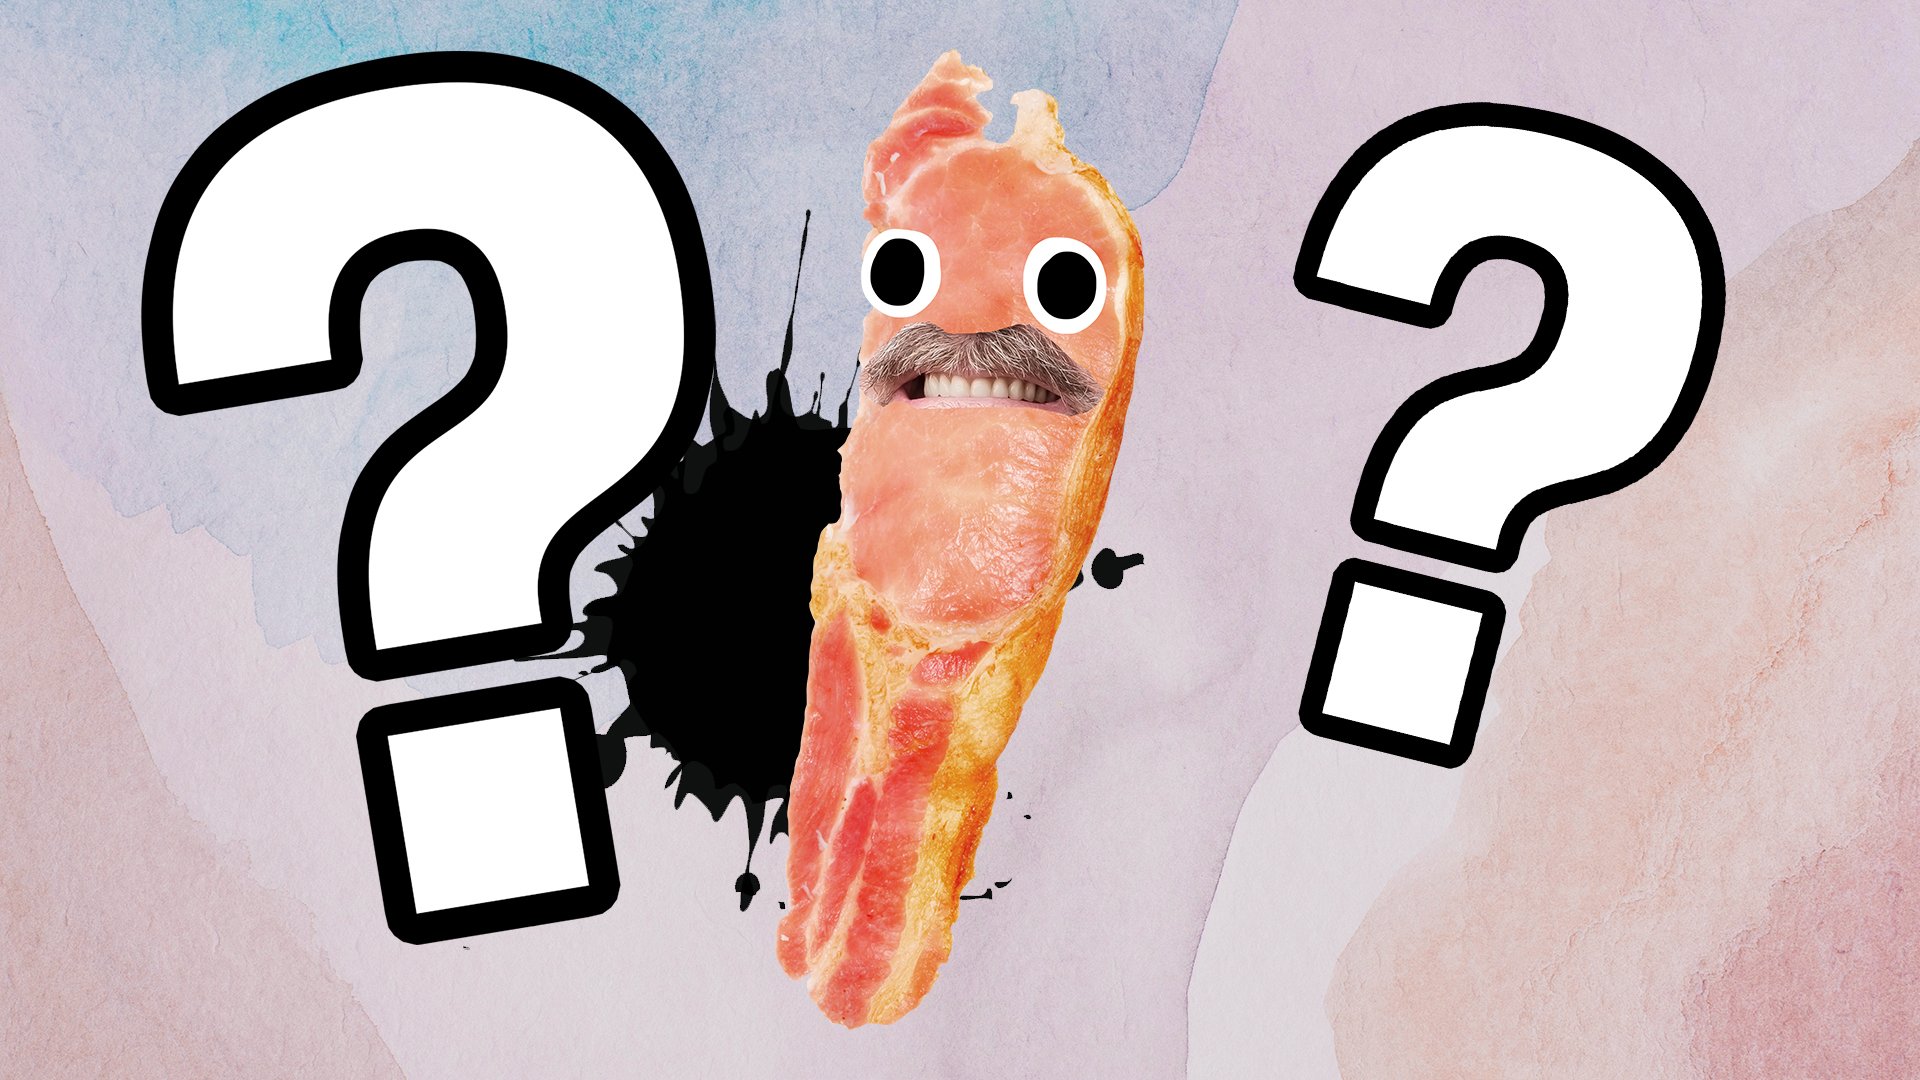 Bacon Dad surrounded by question marks